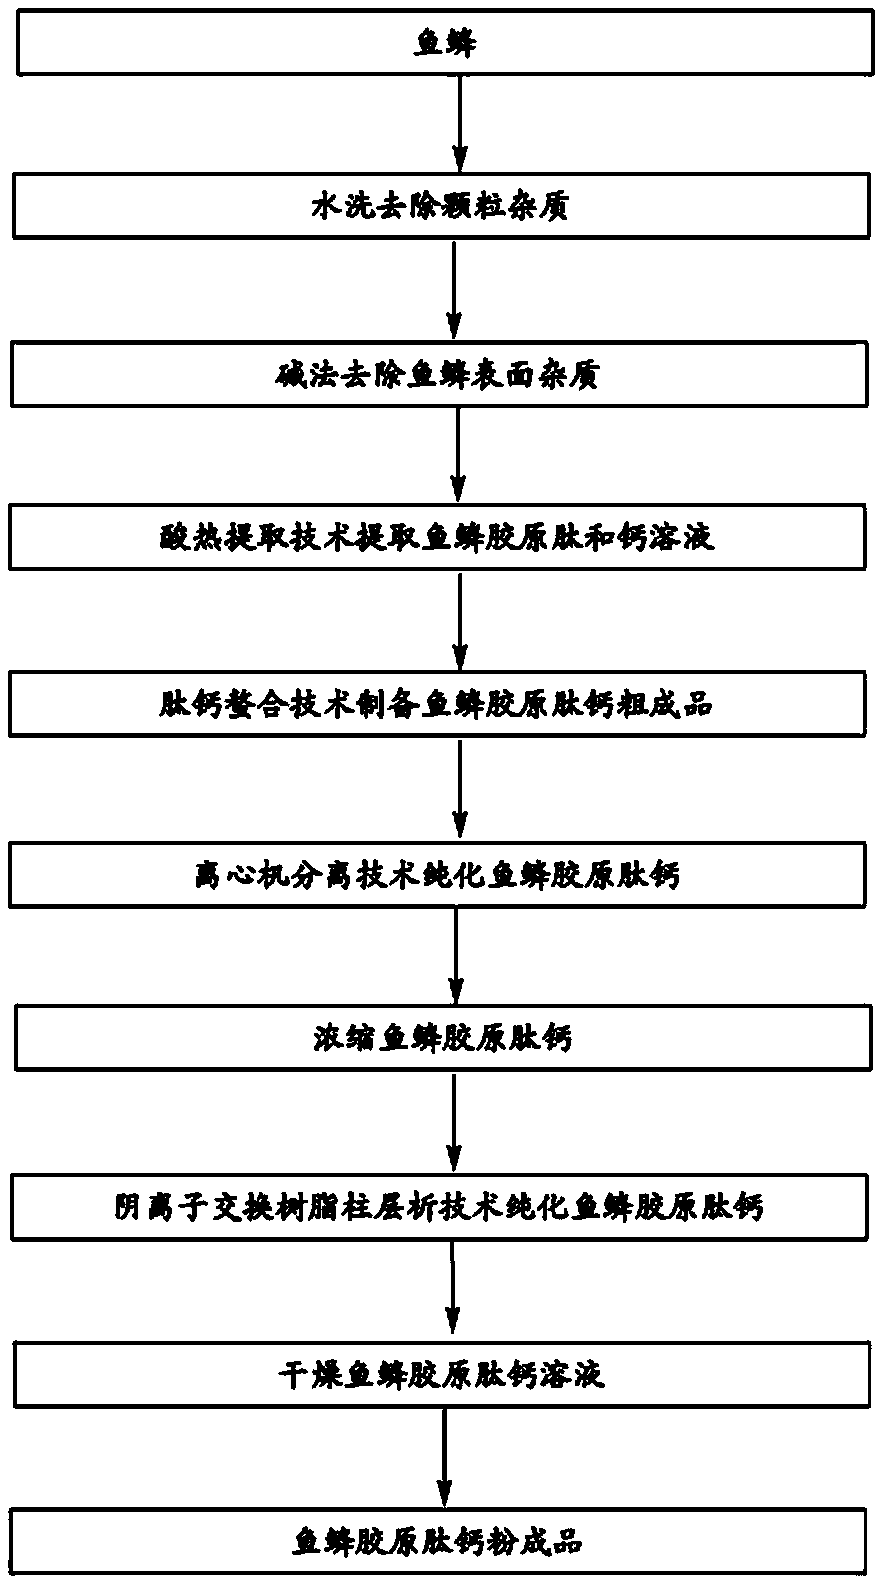 Production process for fish scale collagen peptide calcium